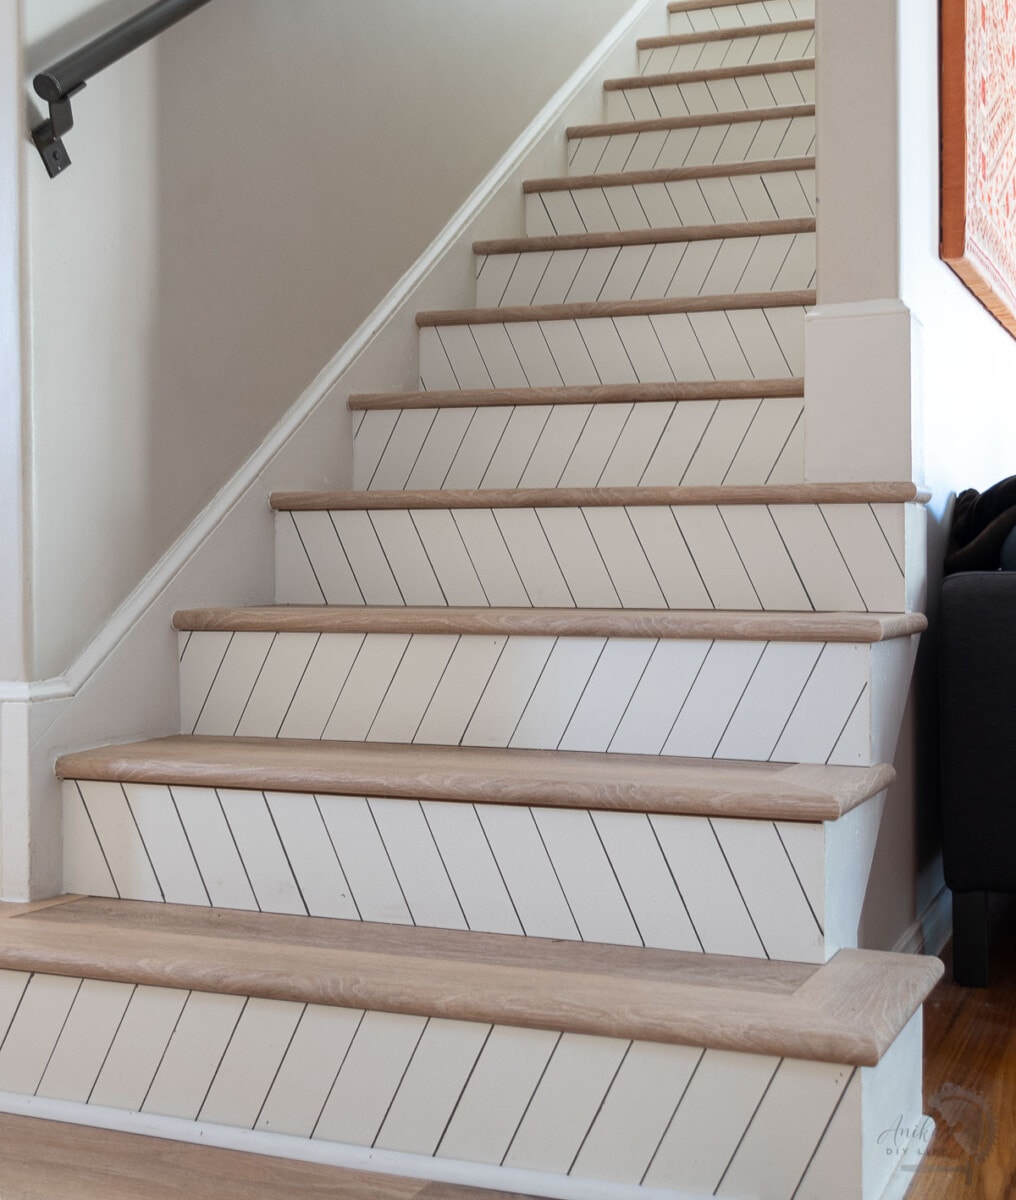 Stairs with vinyl plank flooring and zigzag stair risers